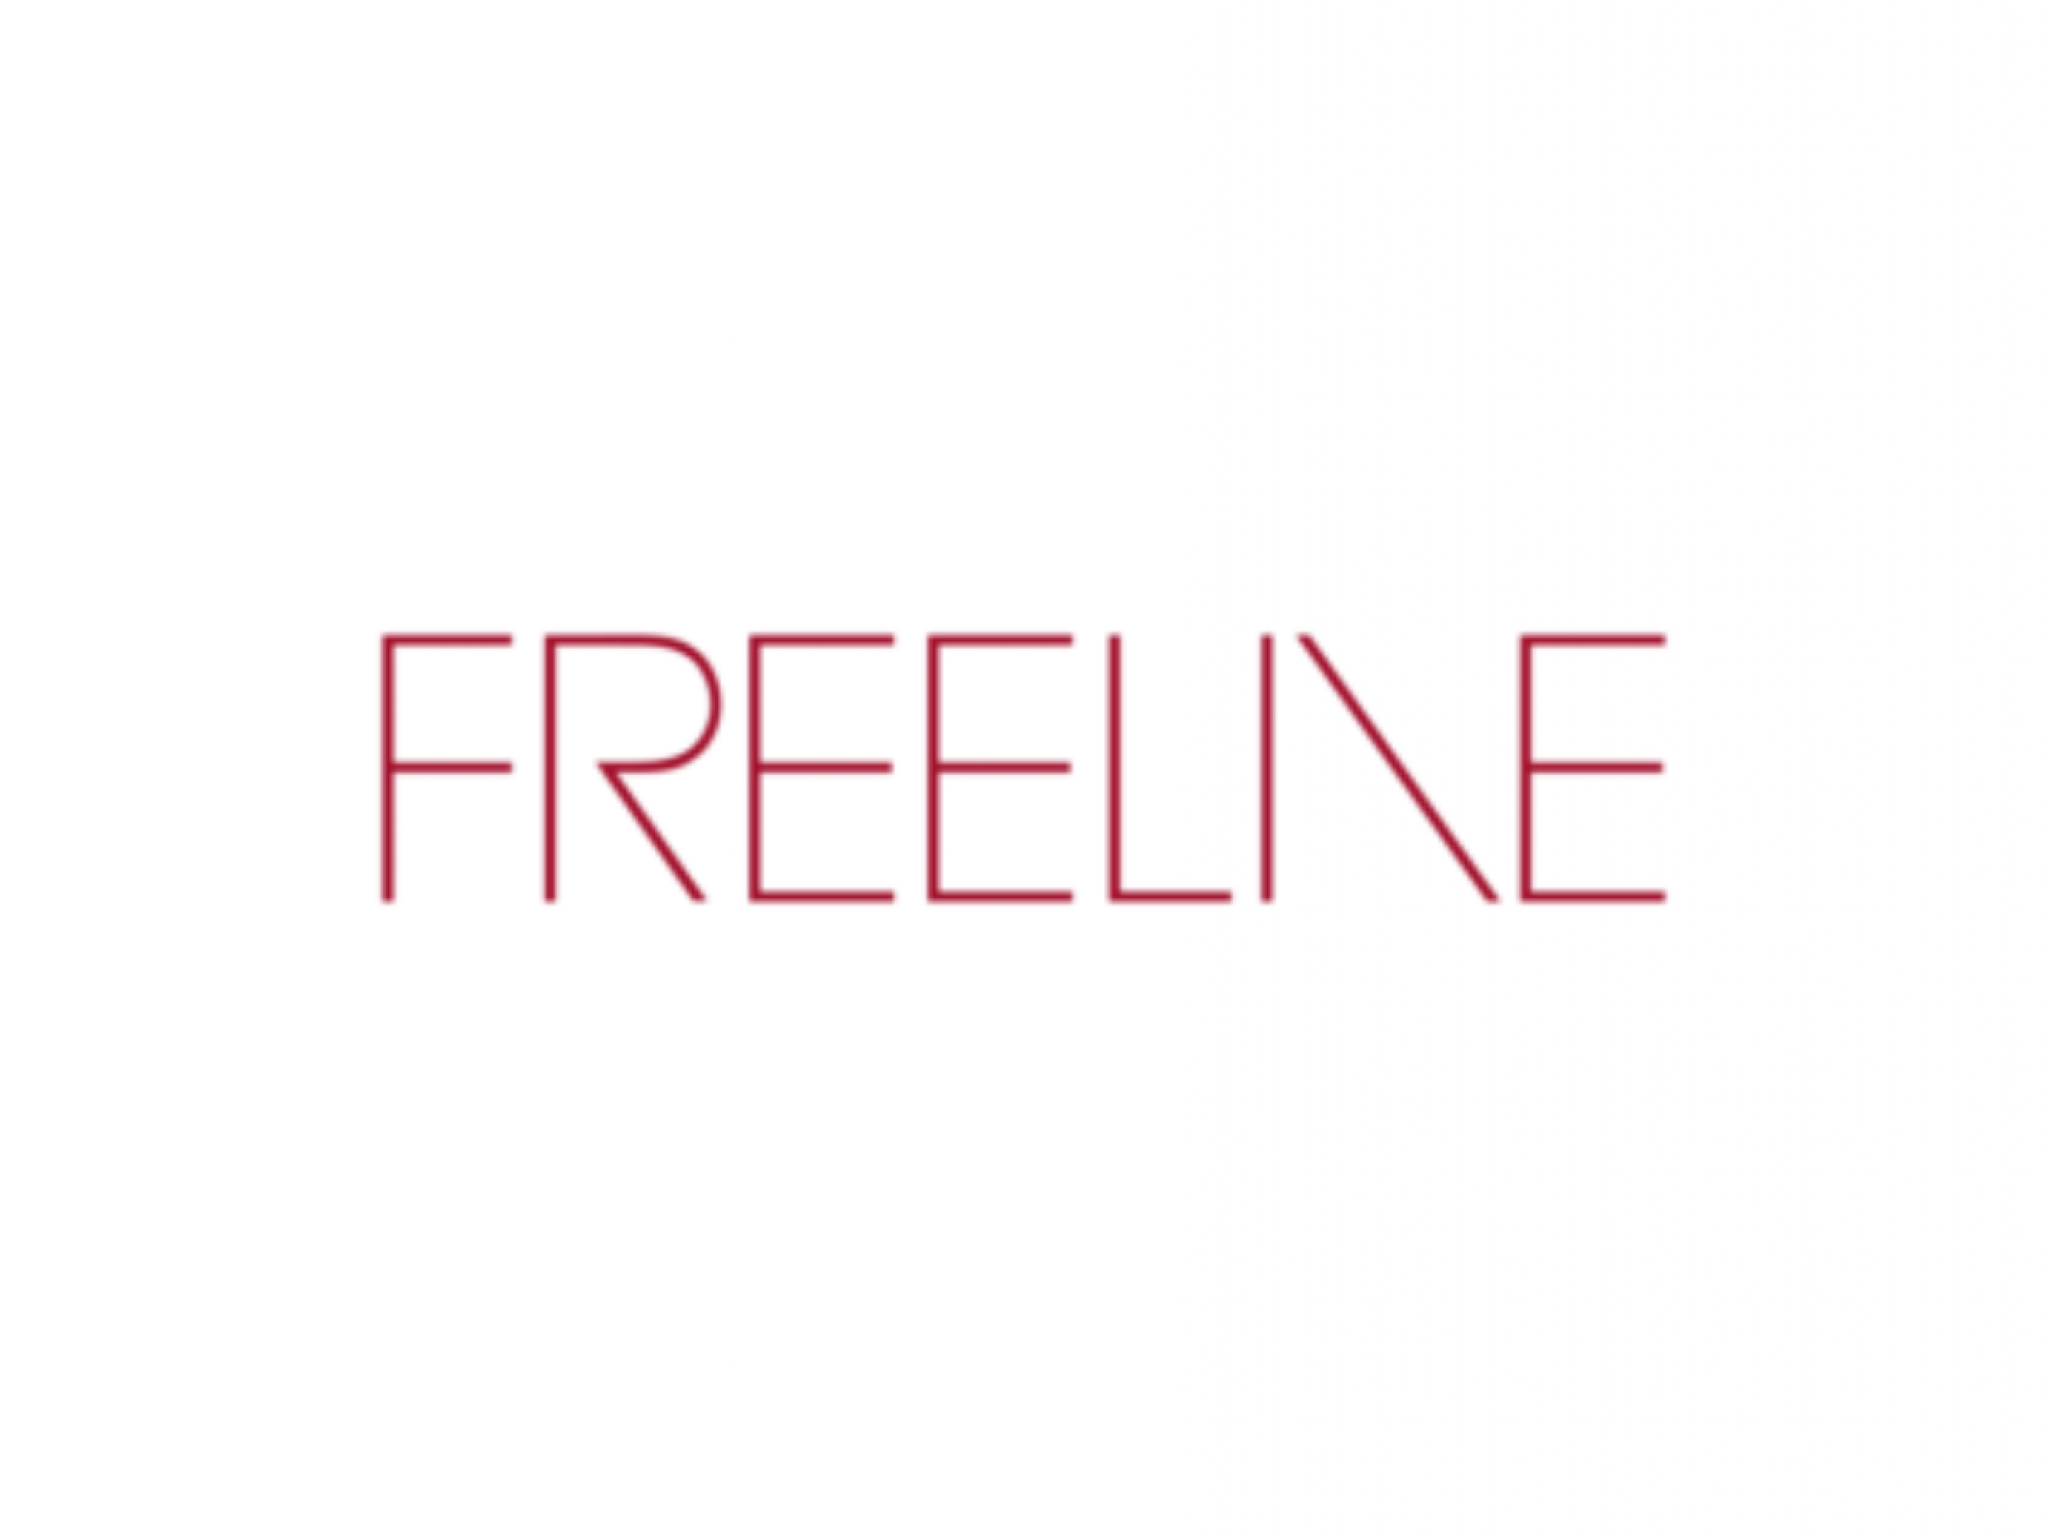  gene-therapy-player-freeline-therapeutics-goes-private-in-28m-deal 